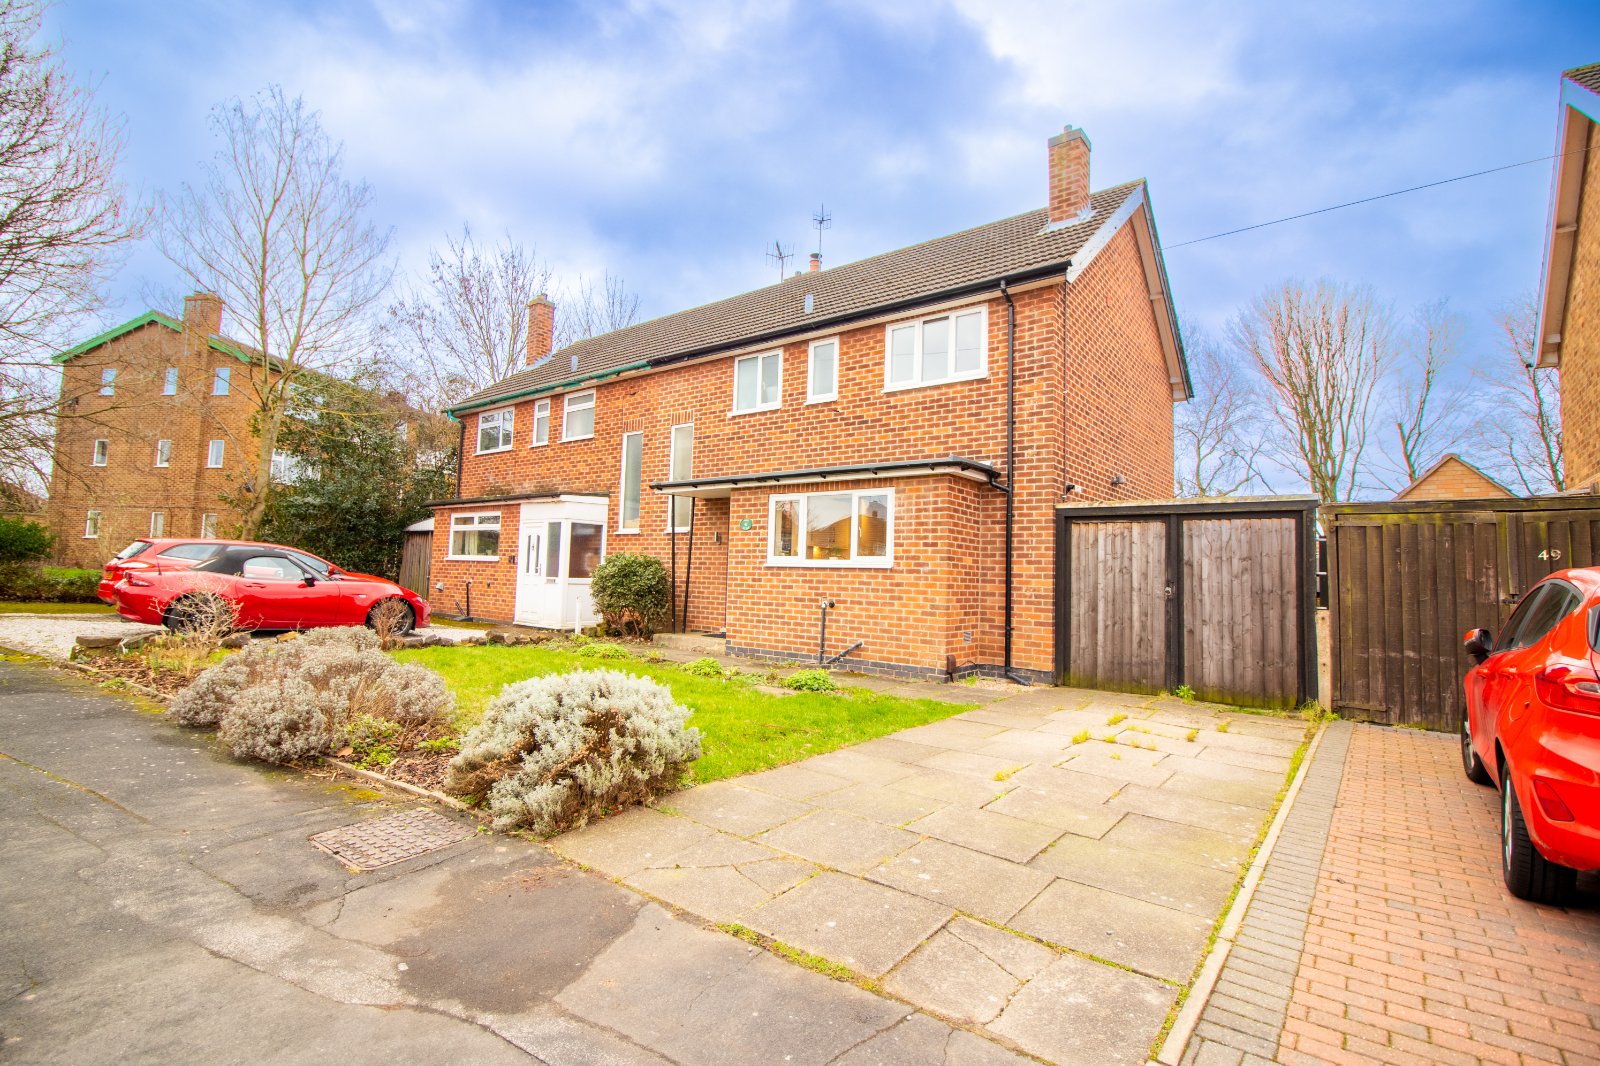 3 bed house for sale in Stowe Avenue, West Bridgford - Property Image 1